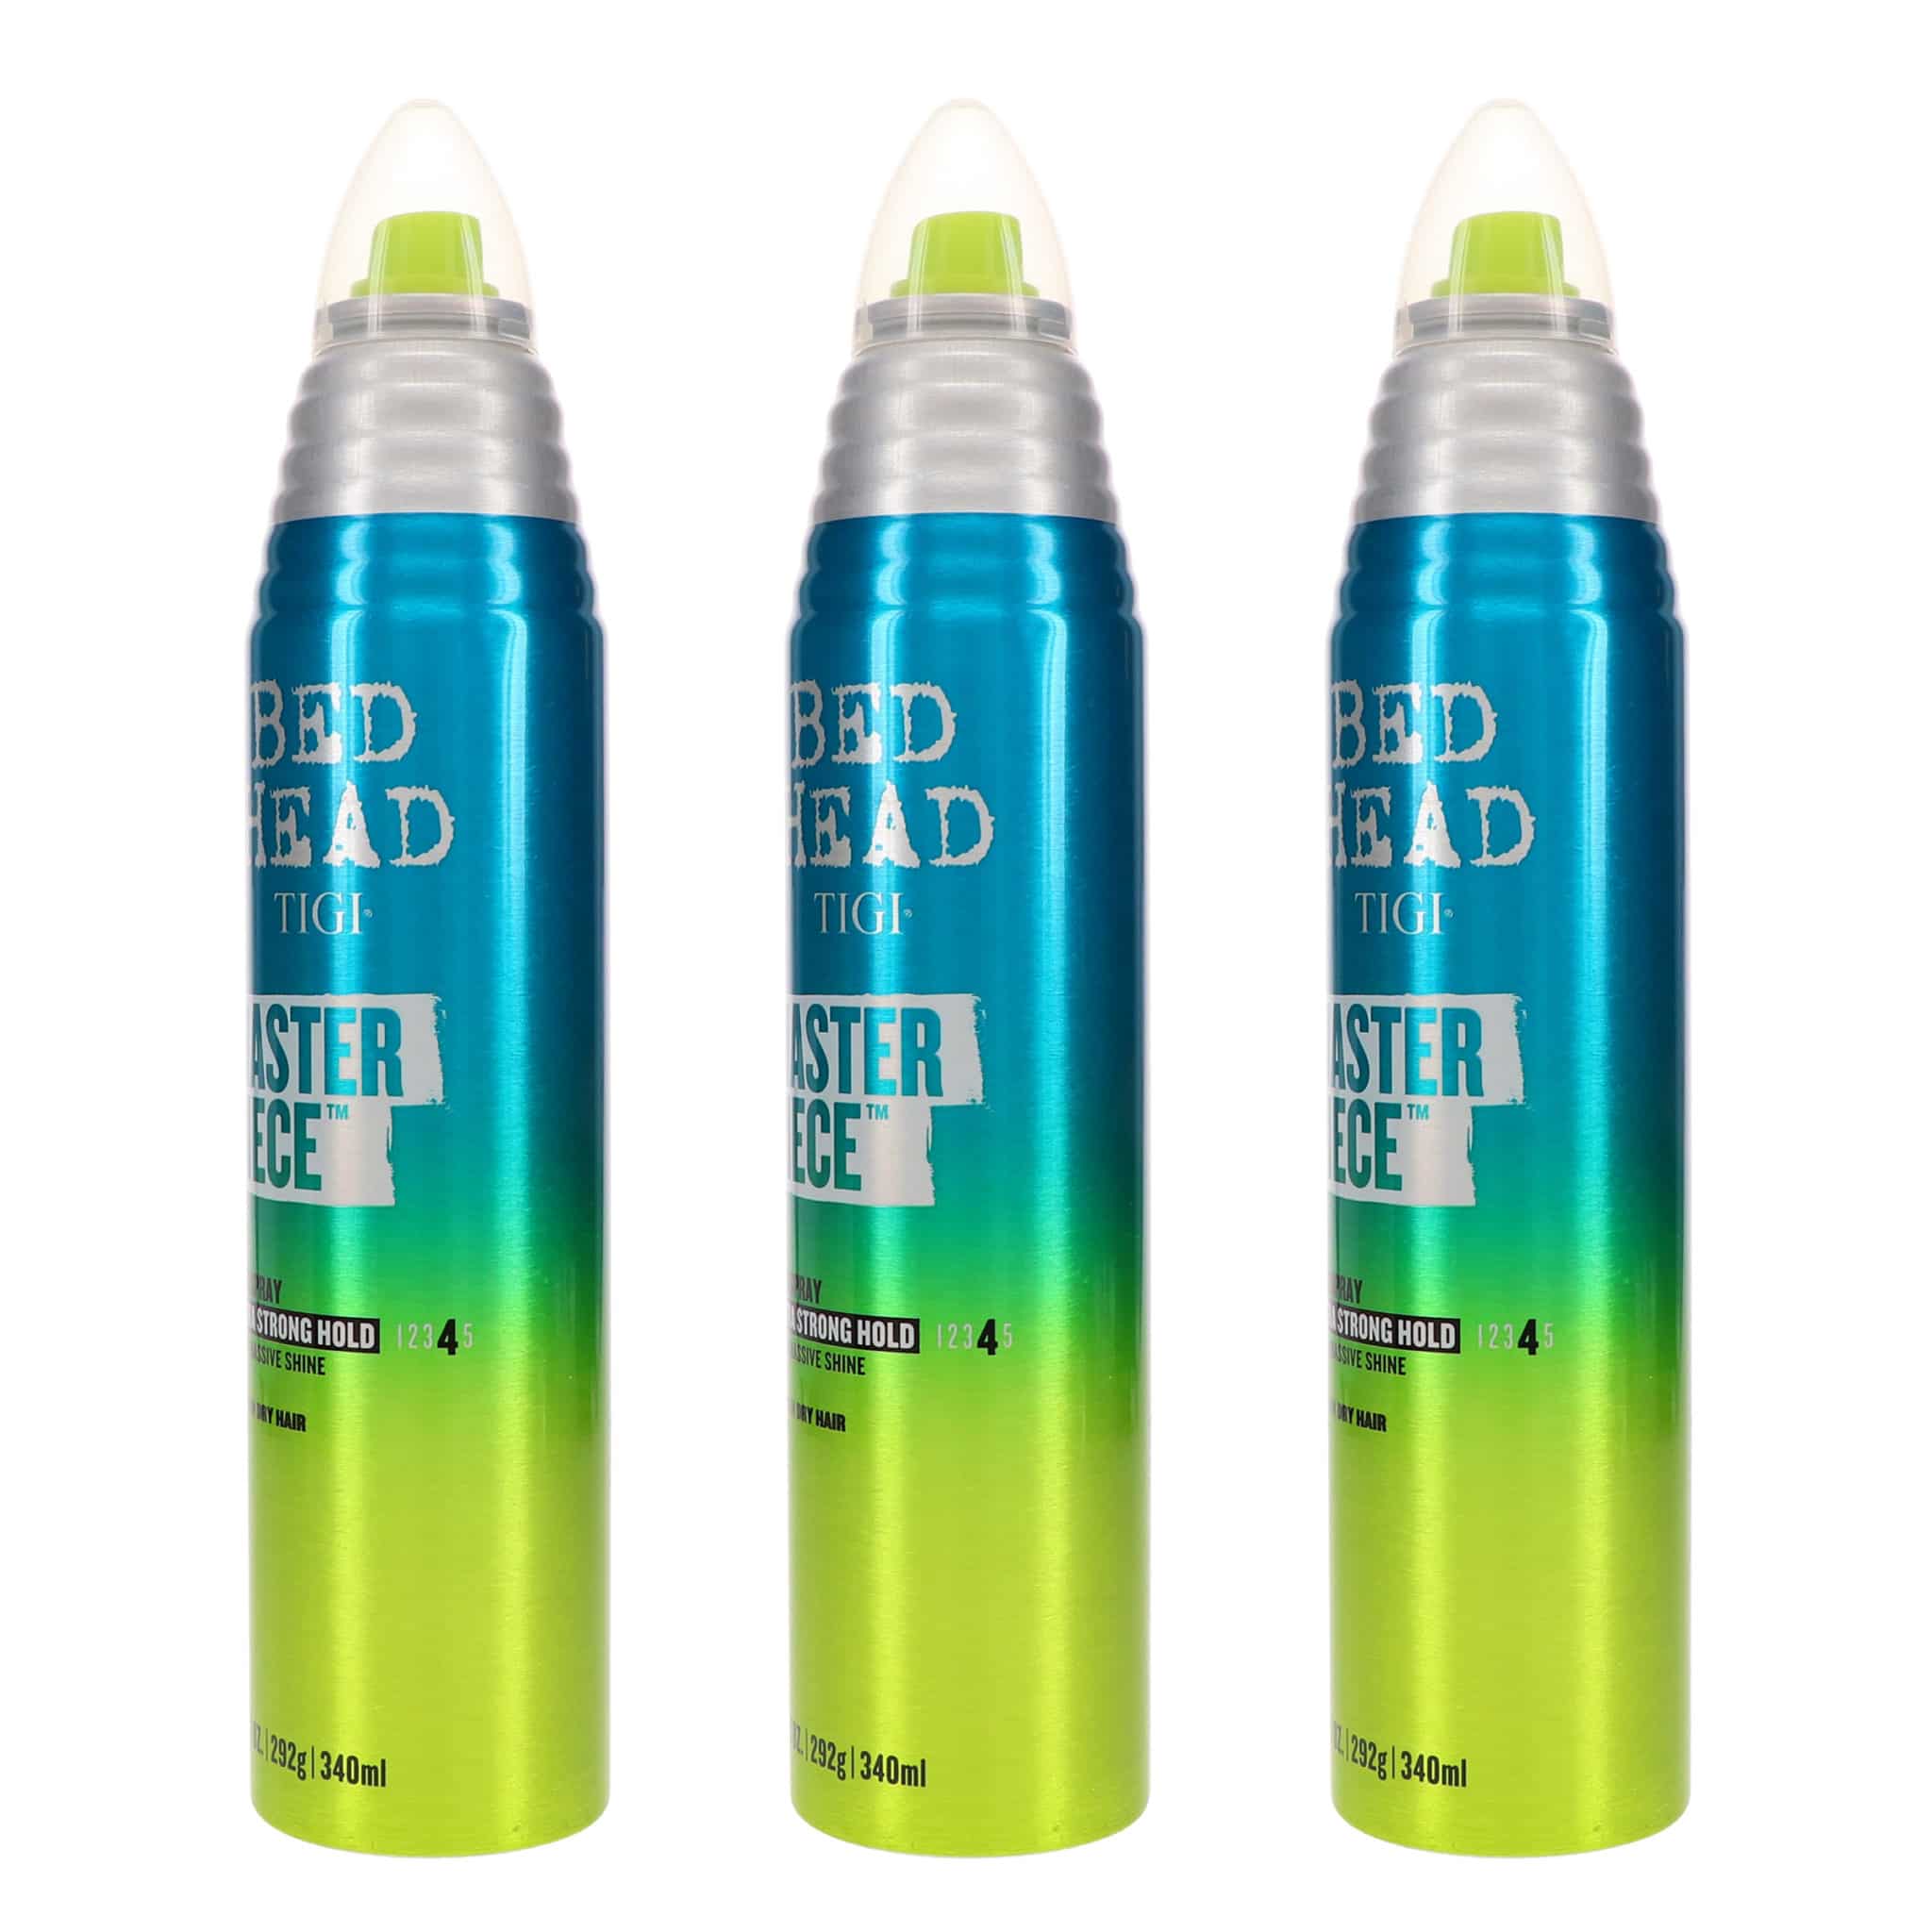 Tigi Bed Head Masterpiece Extra Strong Hold Hairspray Oz Pack